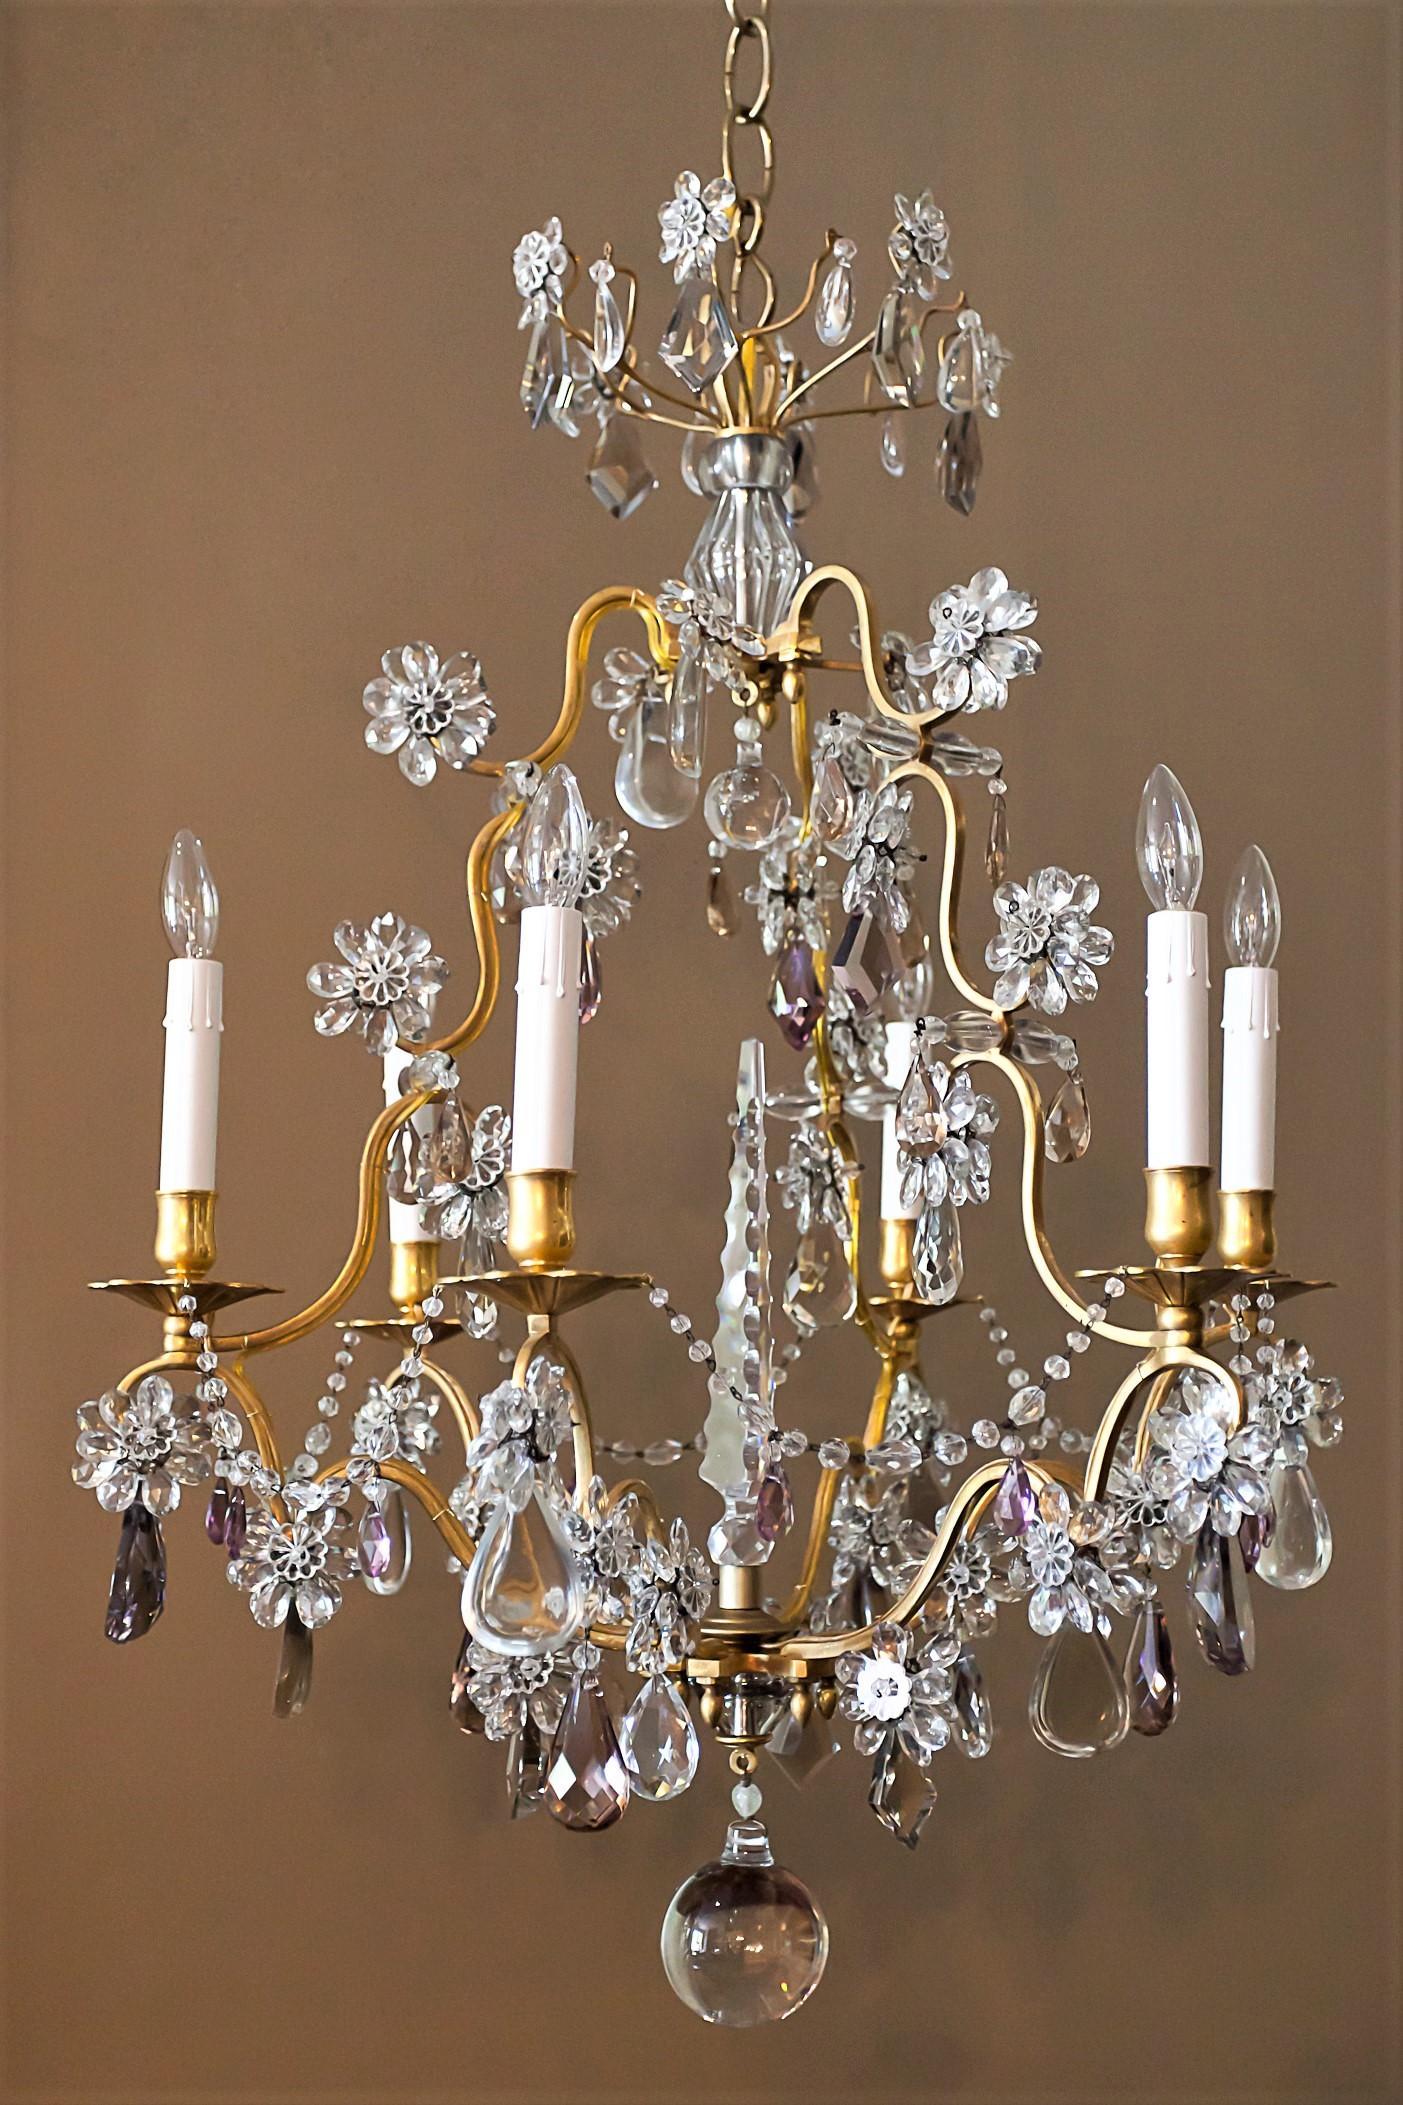 Hand wrought gilt bronze frame with handcut clear, light-amethyst and smokey-quartz prisms. The fixture has crystal chain, central cut spire, and blossoms. Chandelier comes with hanging hardware, ceiling cap, and one foot of chain.